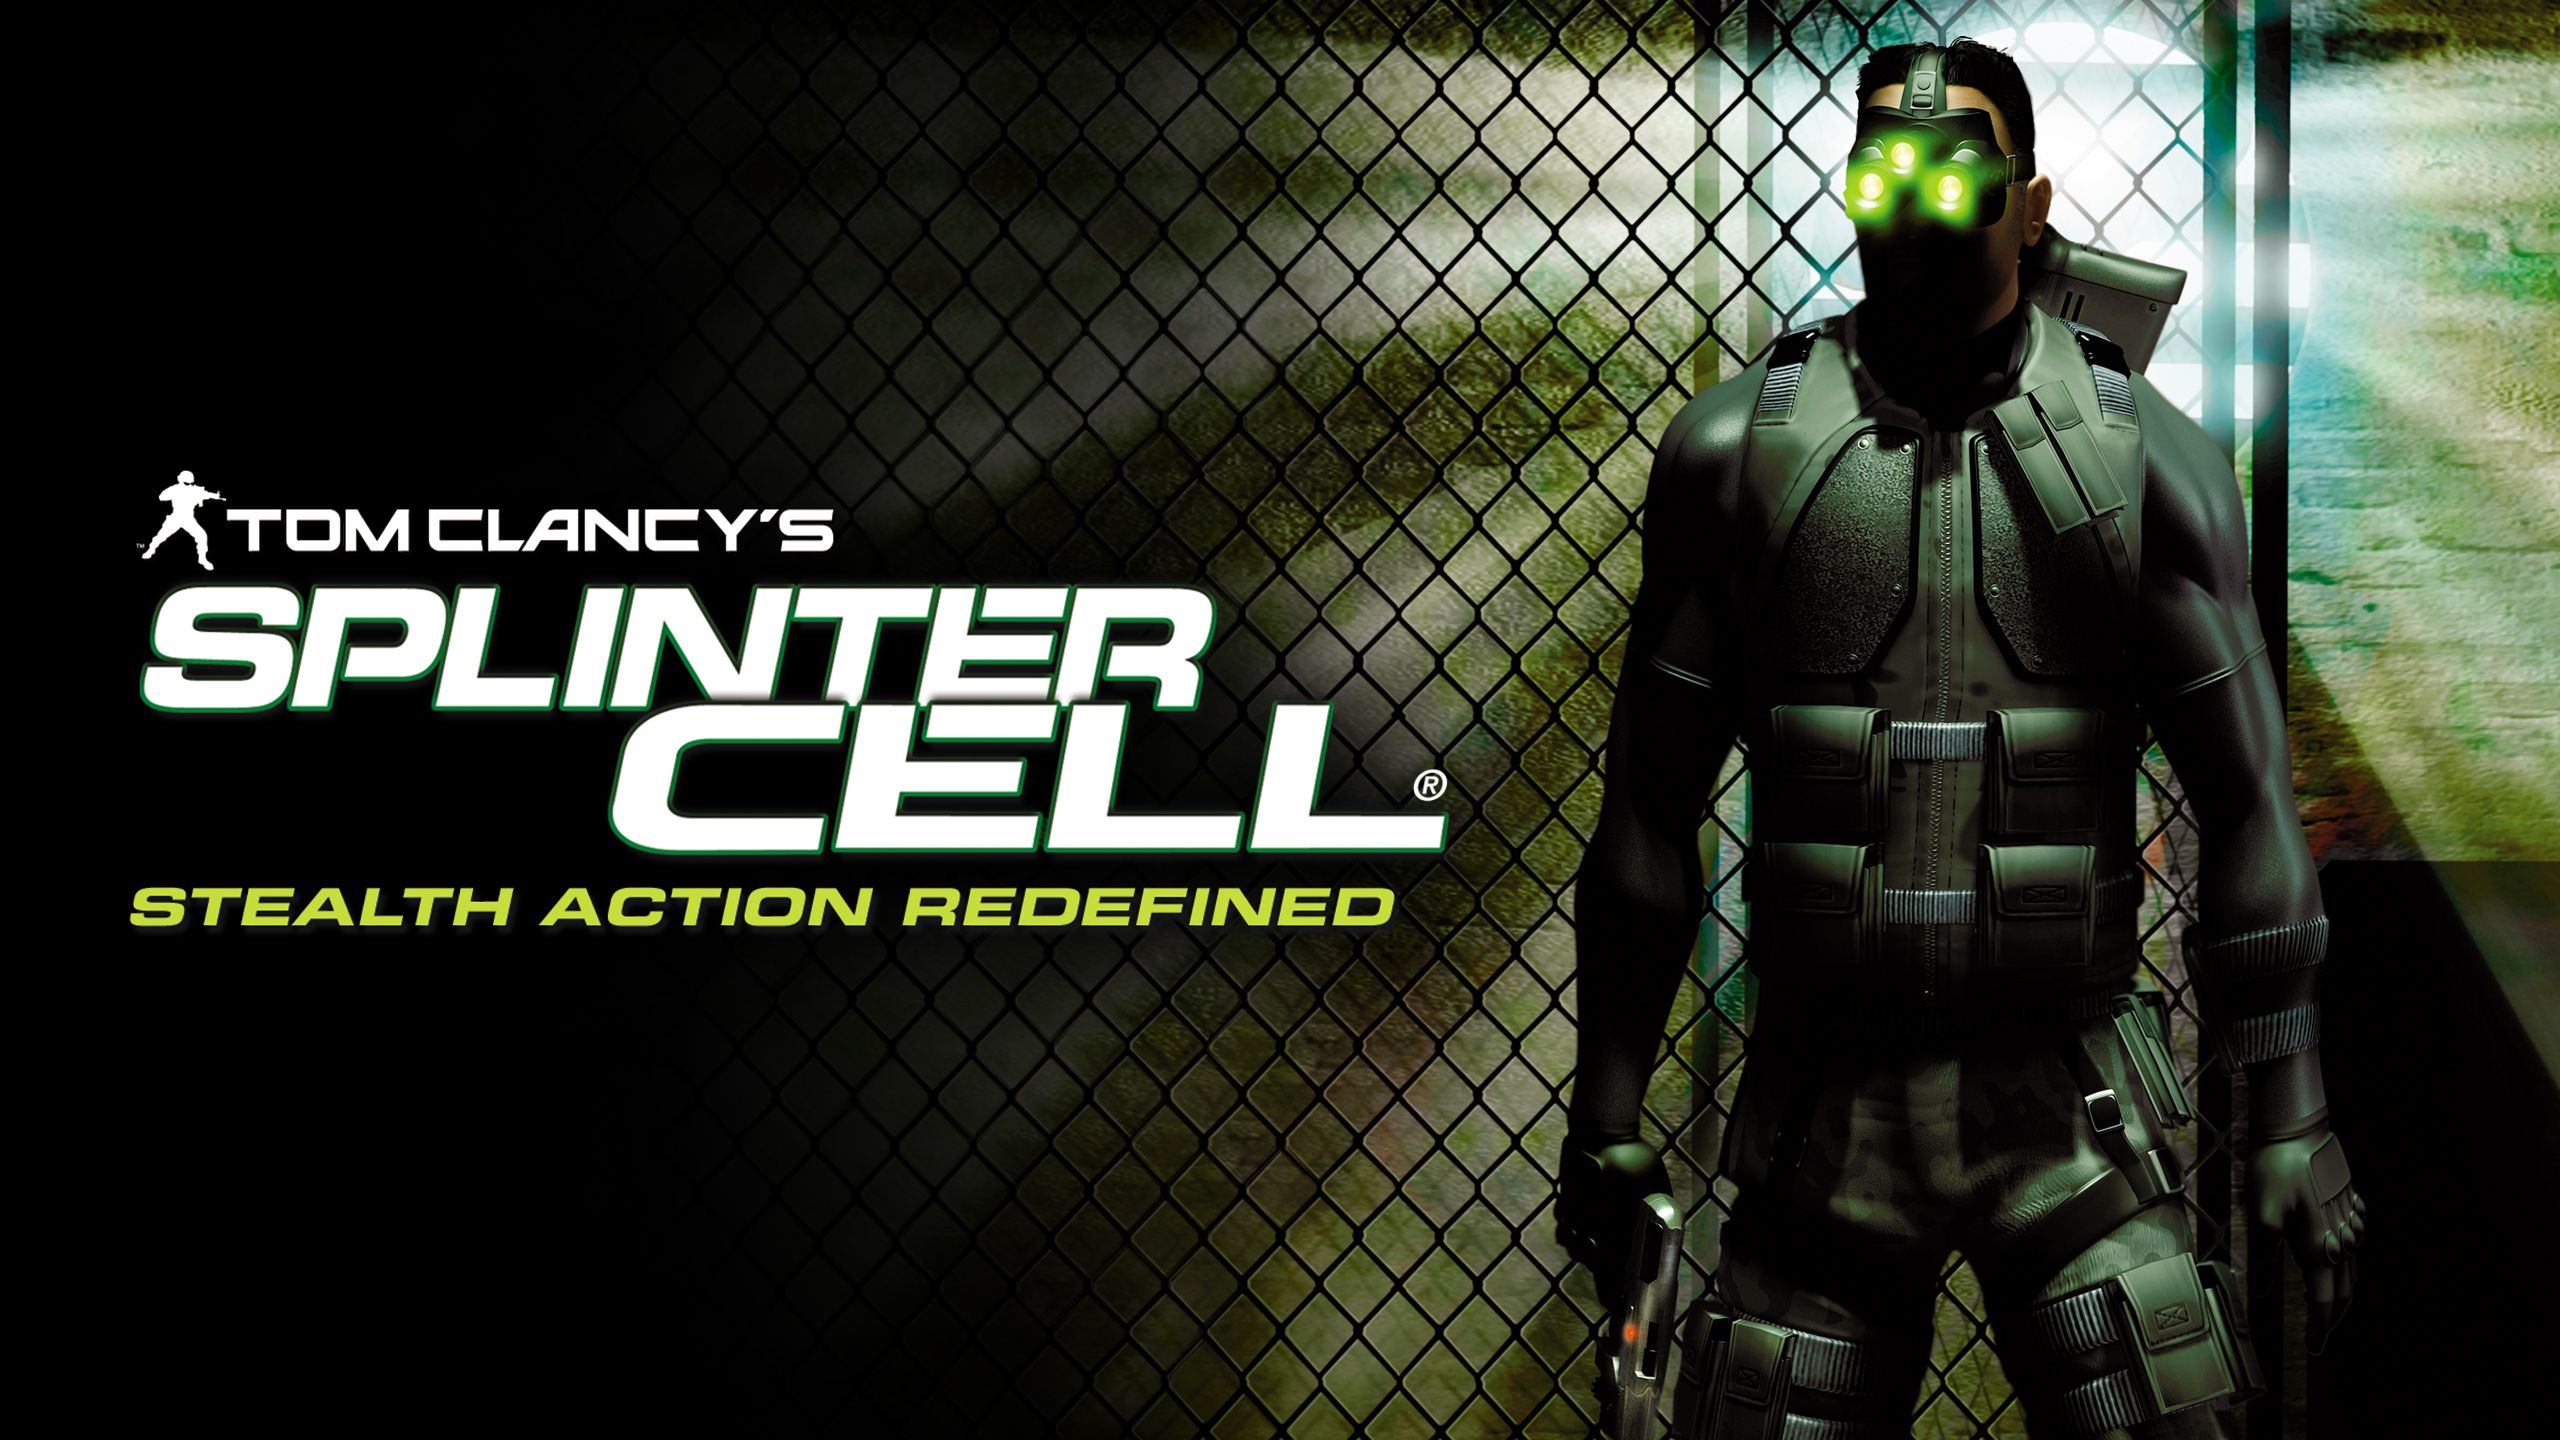 Ubisoft is giving away Tom Clancy’s Splinter Cell on PC for FREE